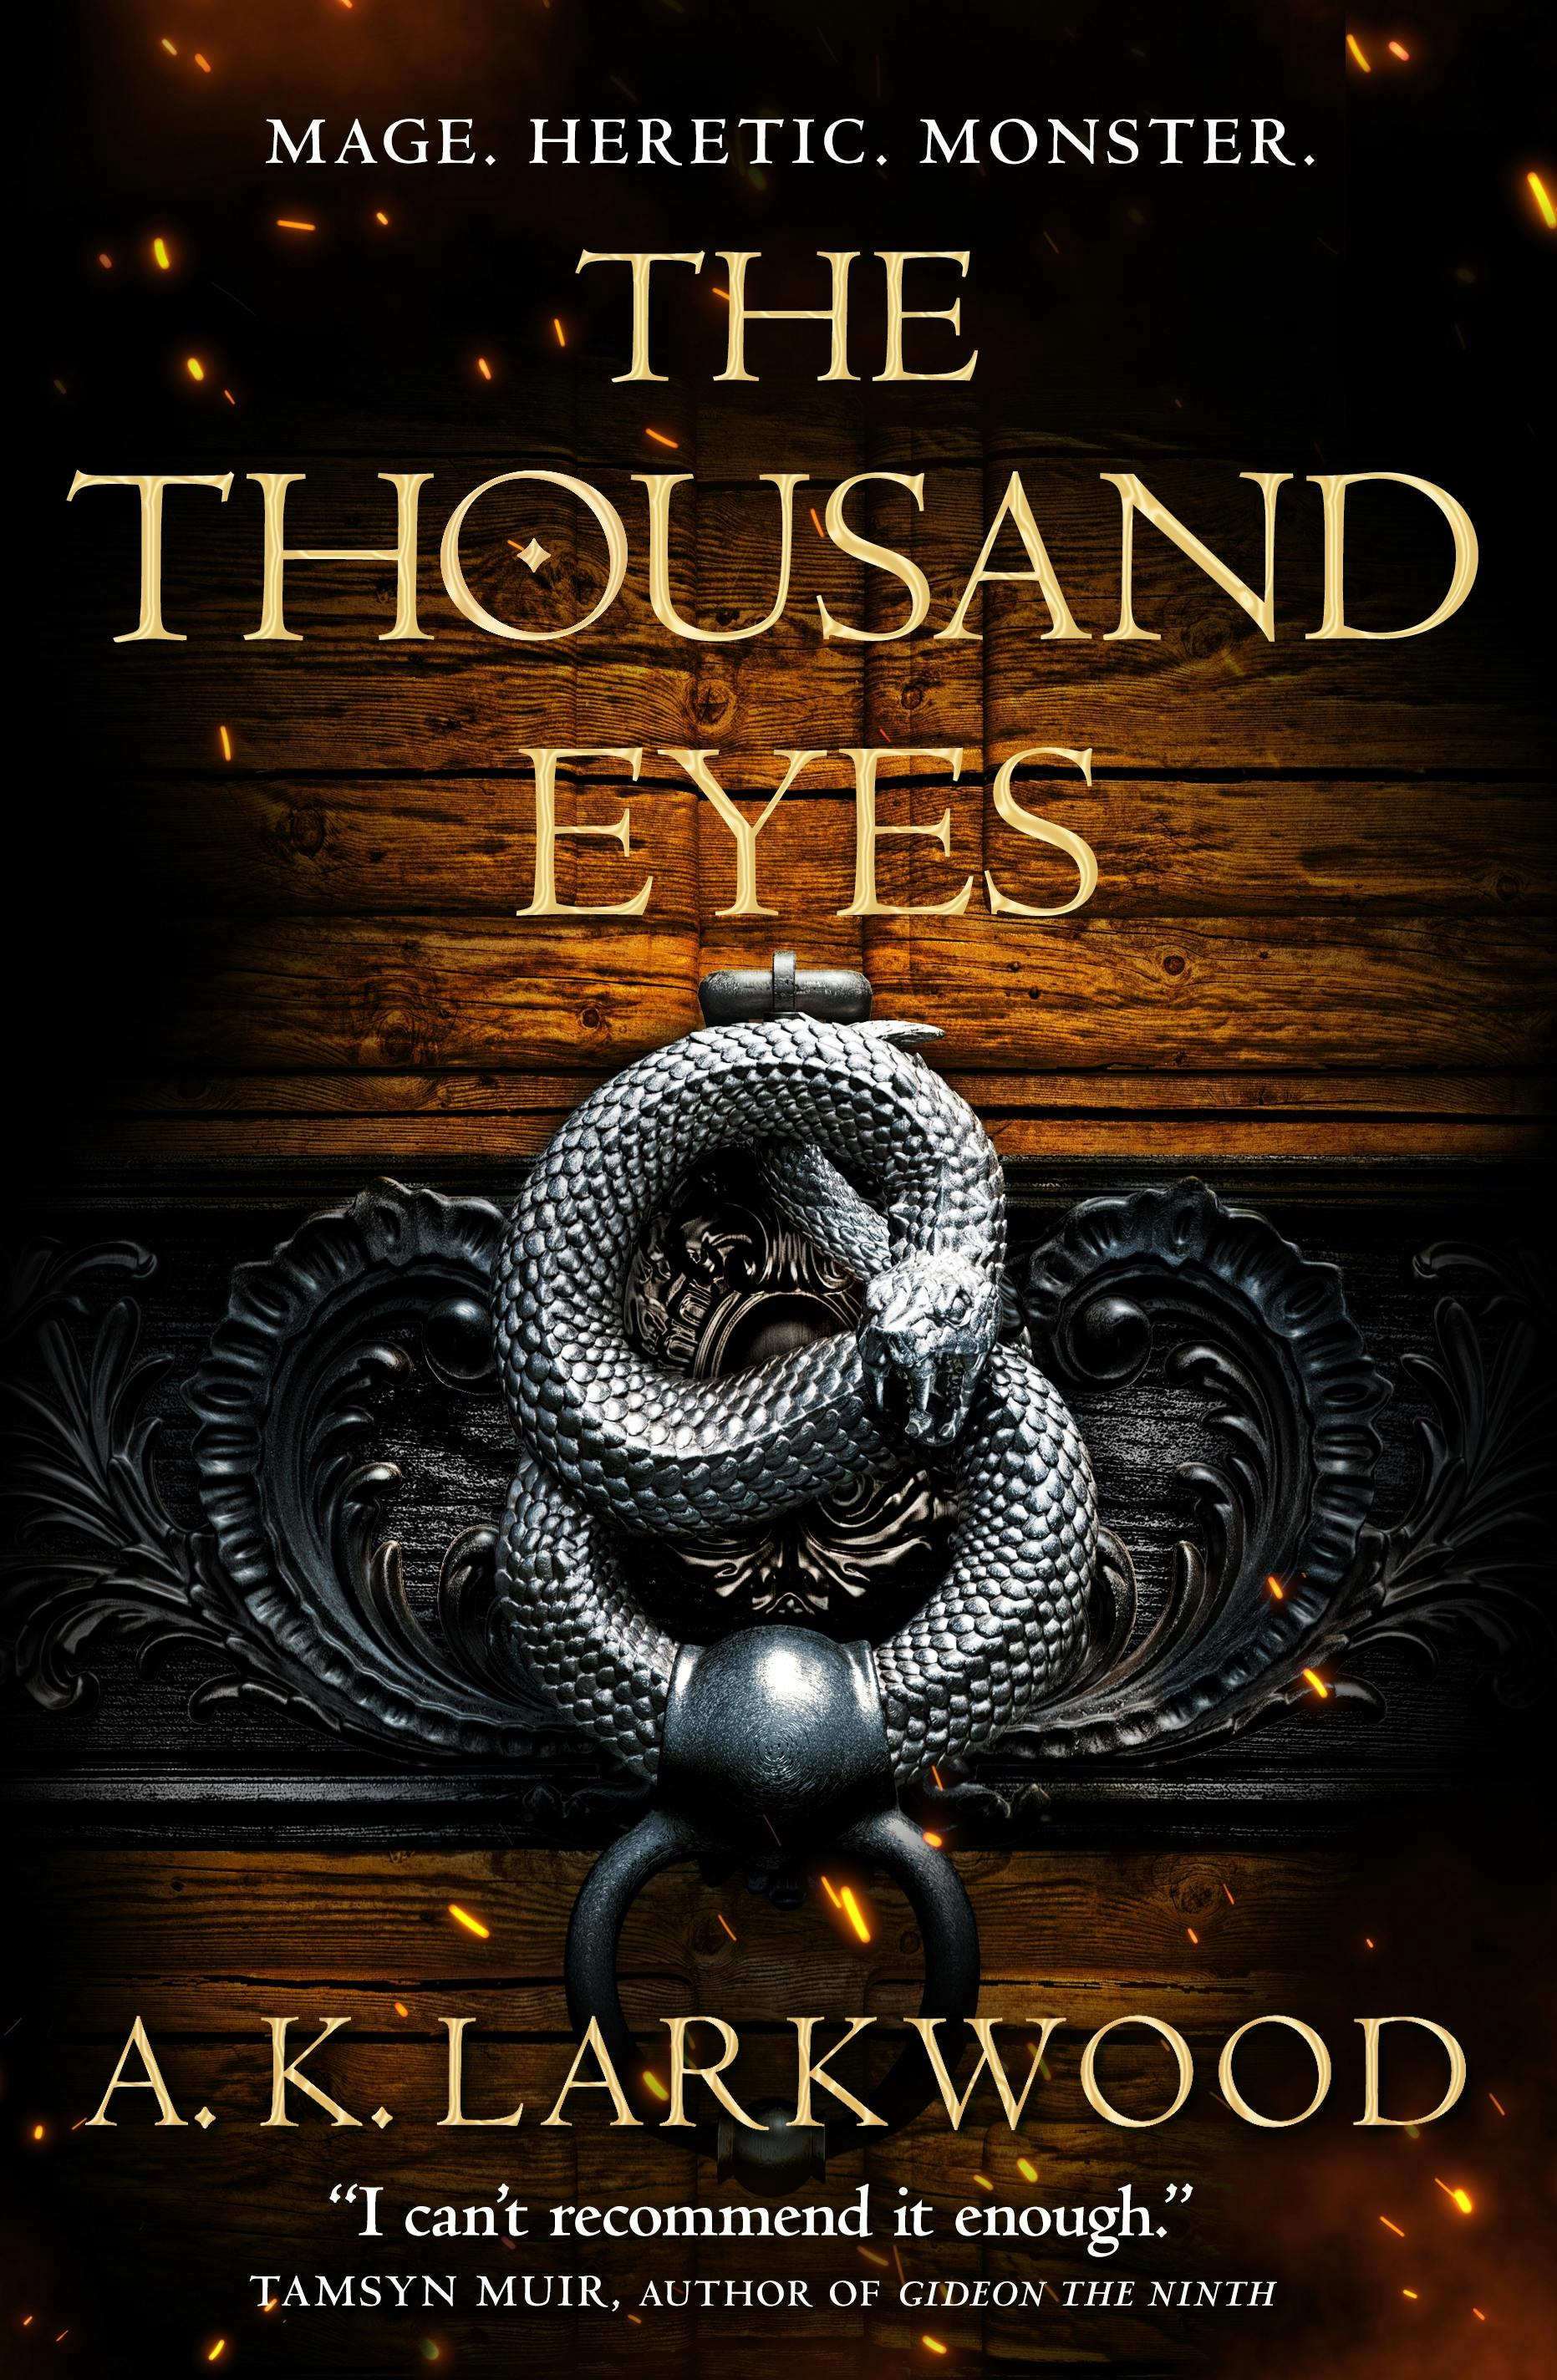 Cover for the book titled as: The Thousand Eyes